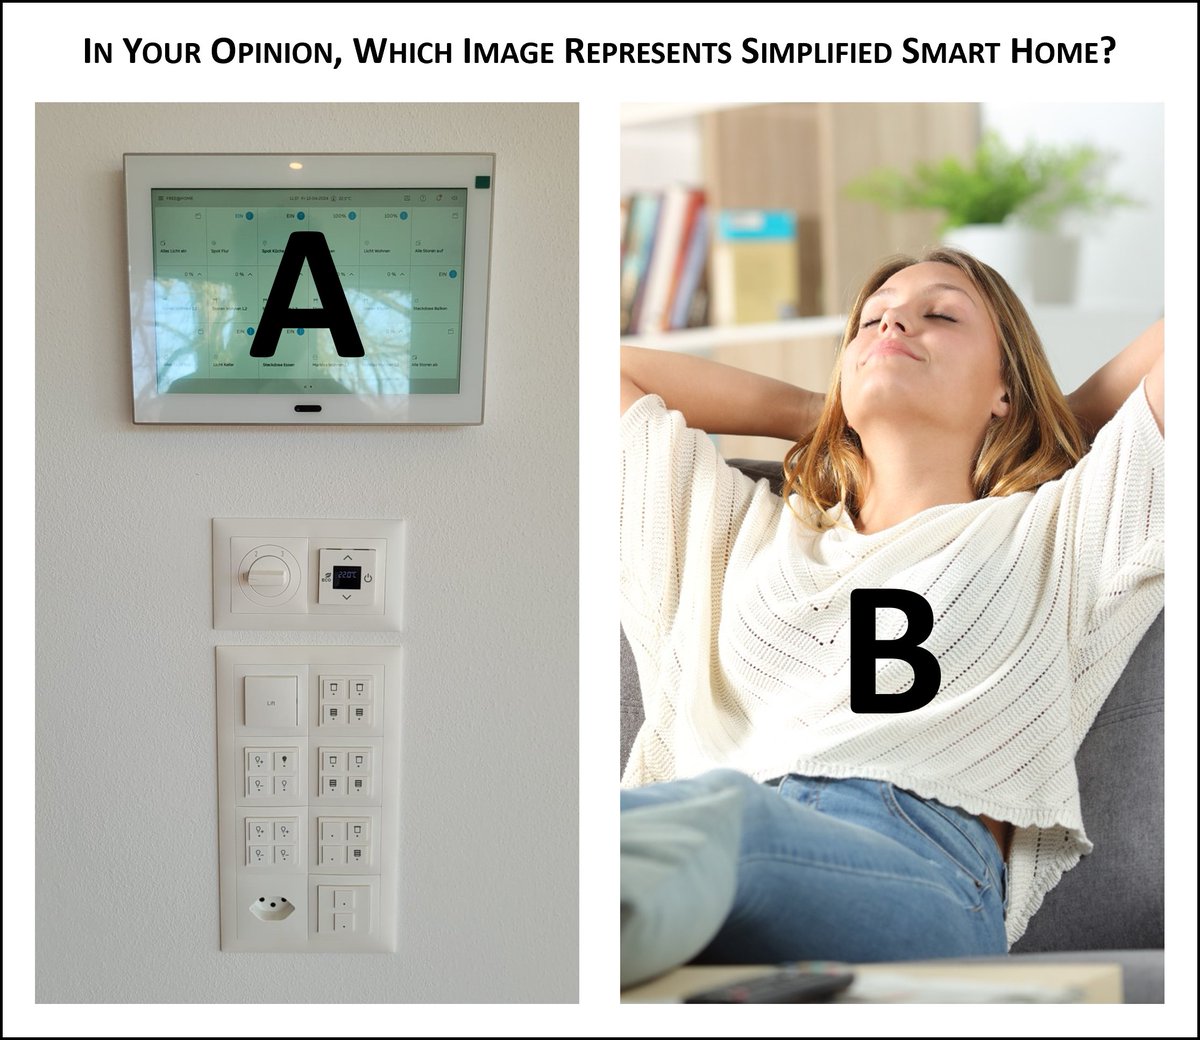 QUICK VOTE📢

What do you associate with #SmarterLiving aka simplified #smarthome?

👉A: Repost
B: Like 👍